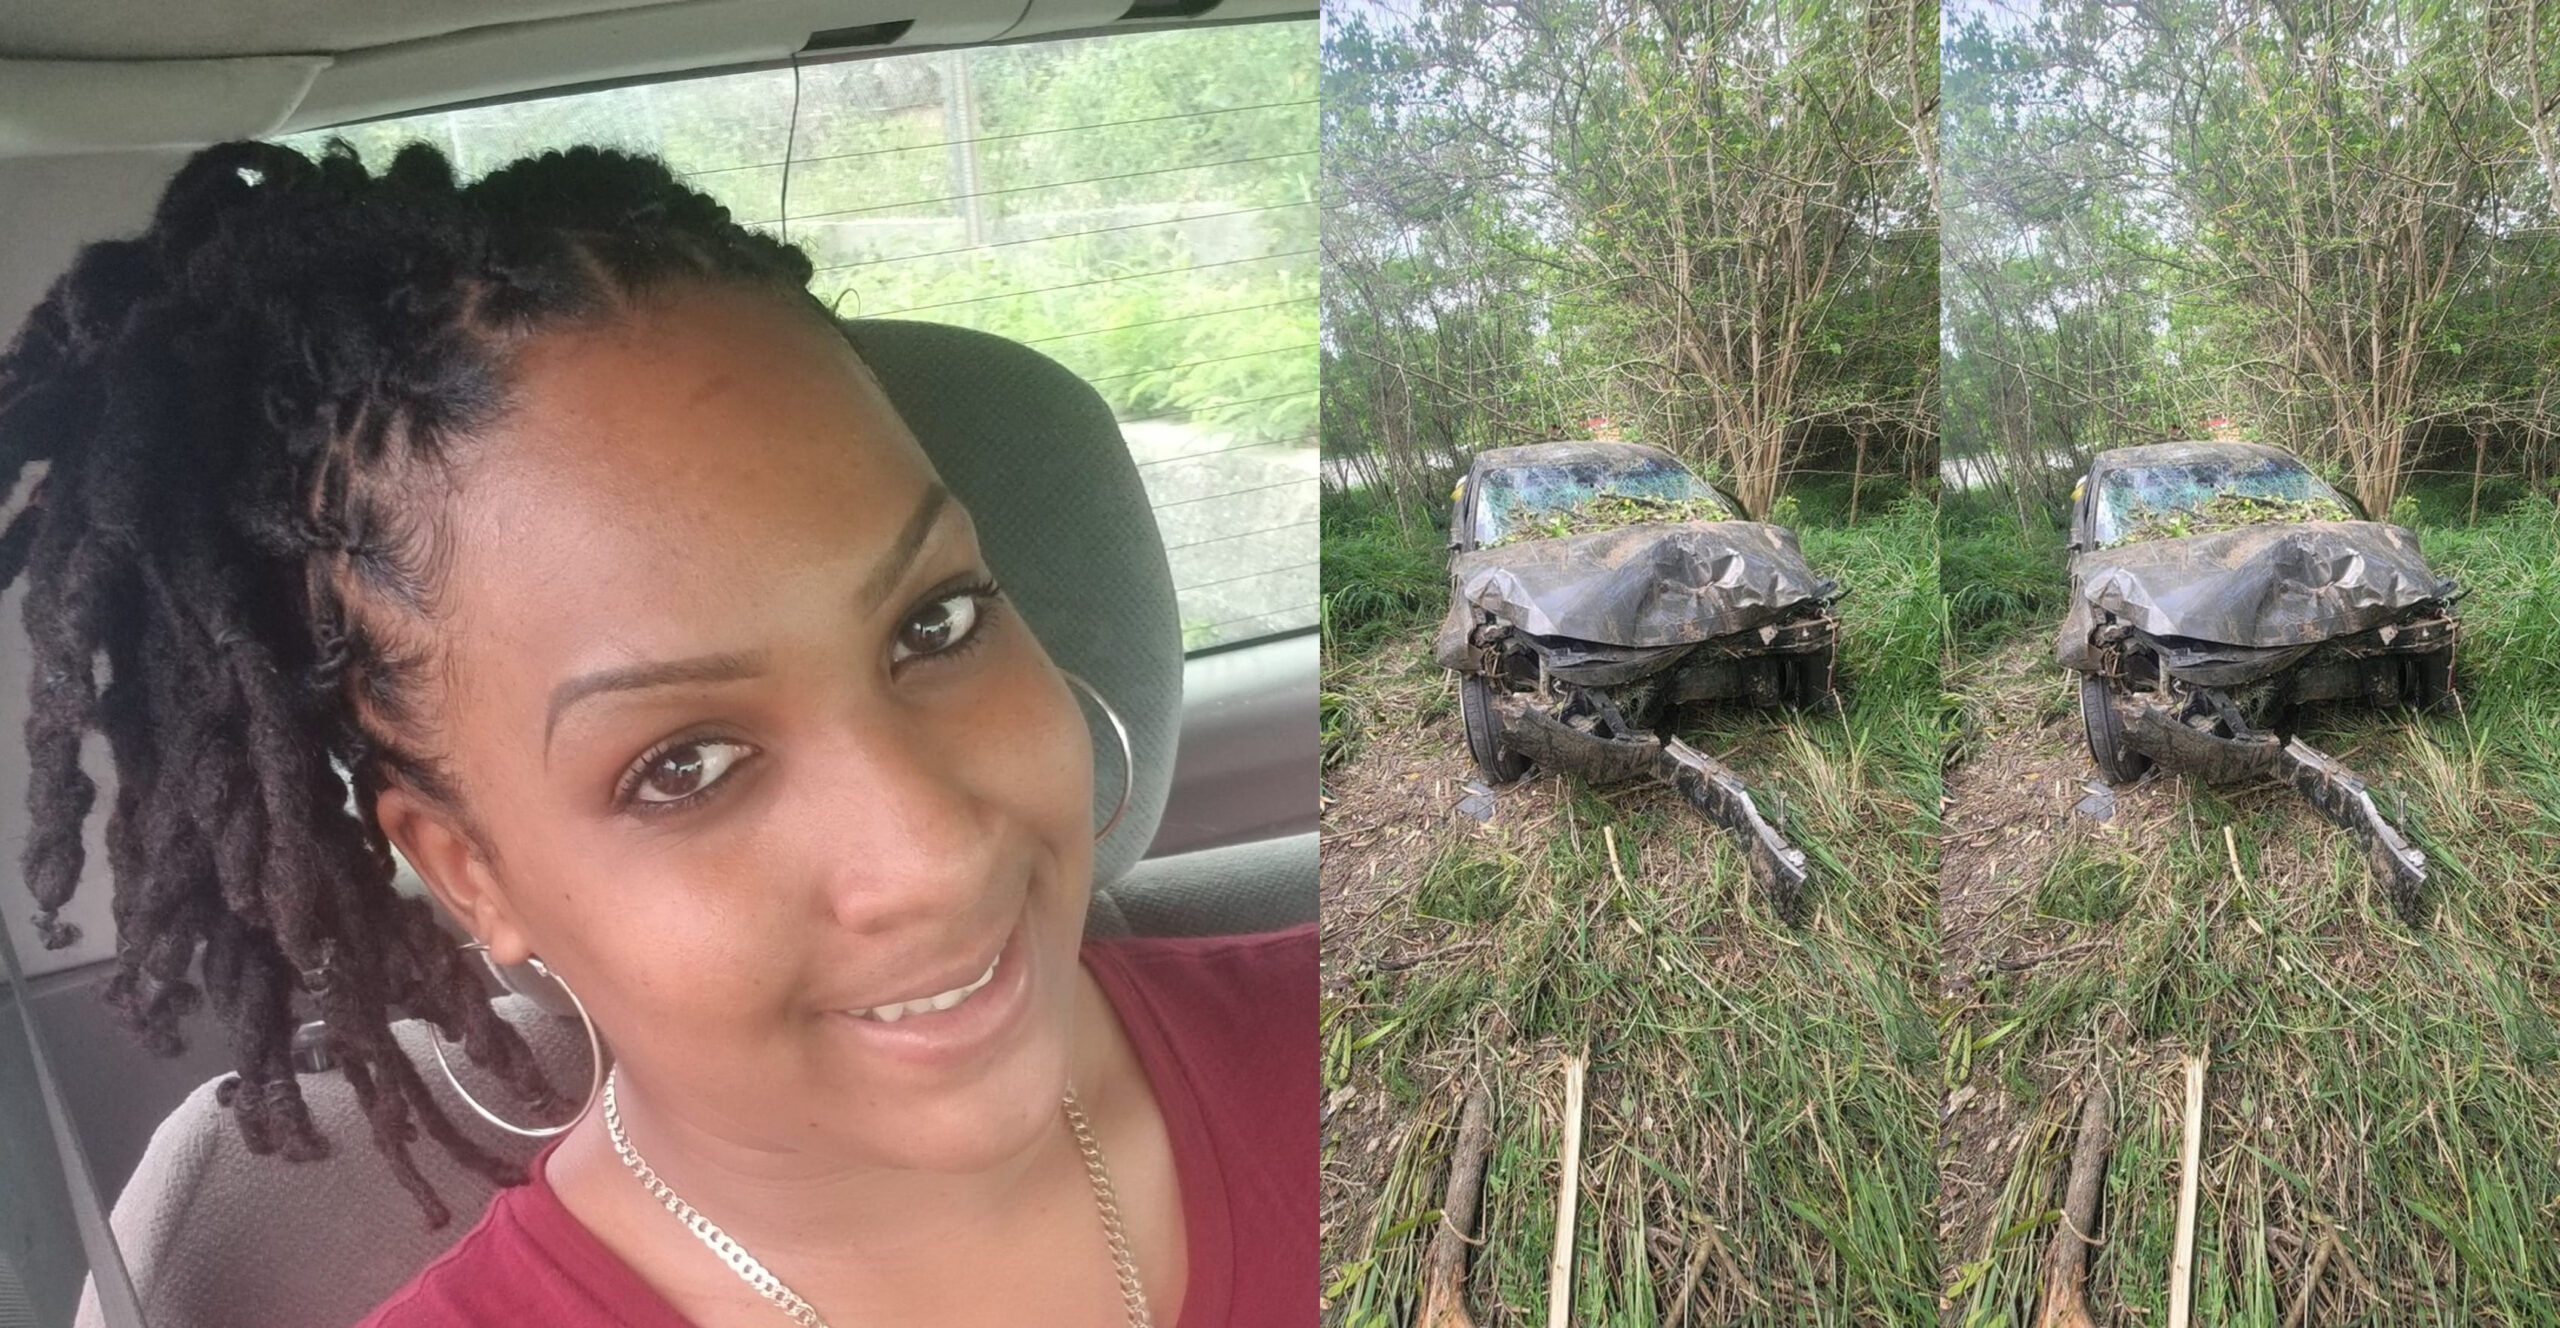 St. Croix Woman Asks Wrong-Way Driver To Come Forward With Facebook Appeal